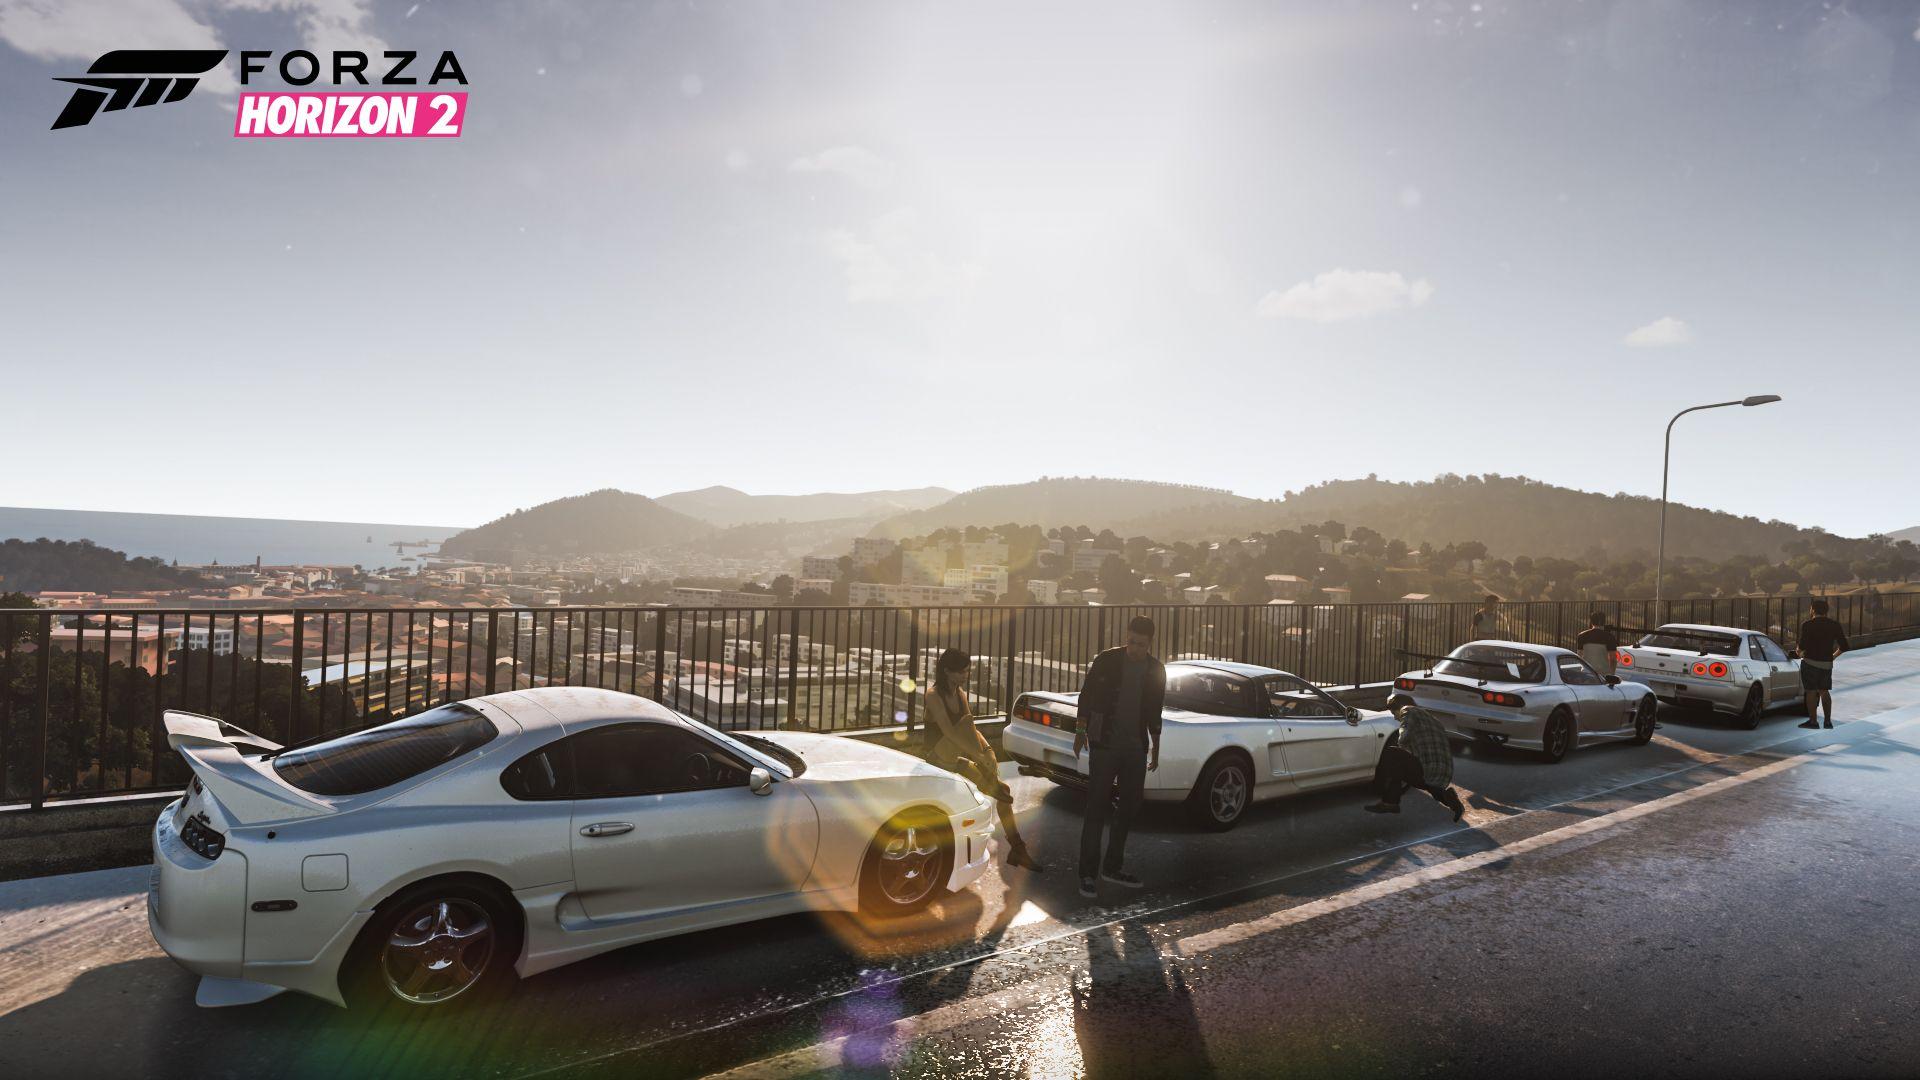 The Cars to Pick Up First in Forza Horizon 2